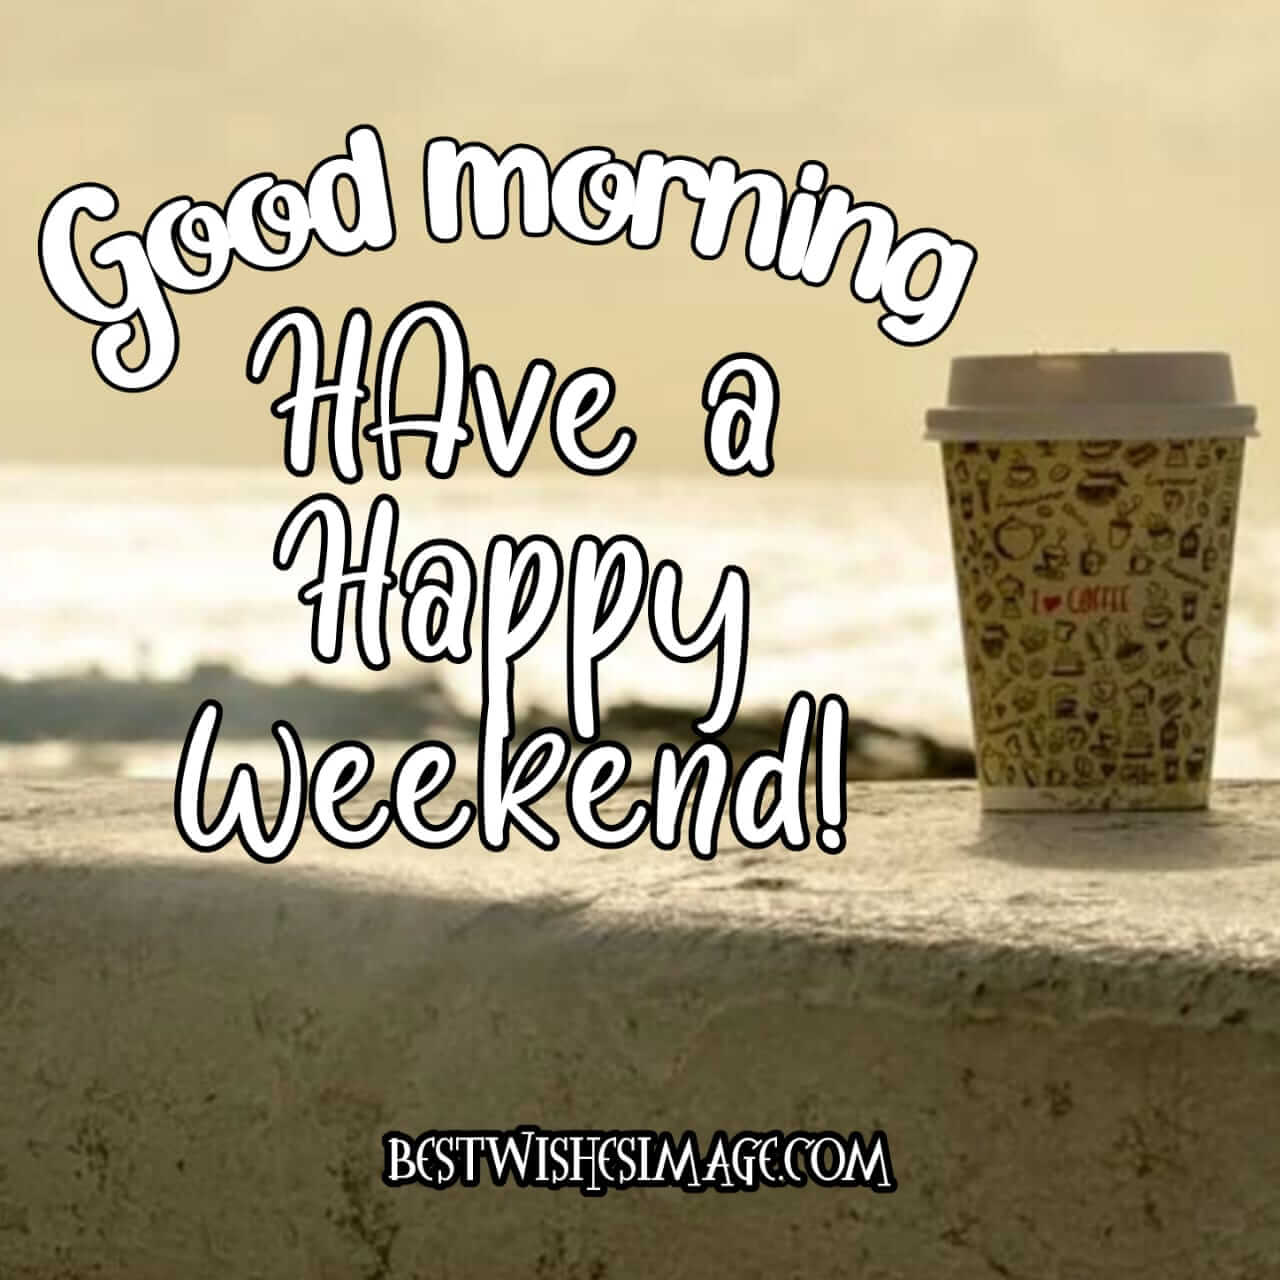 Good Morning Happy Weekend image free download wishes image